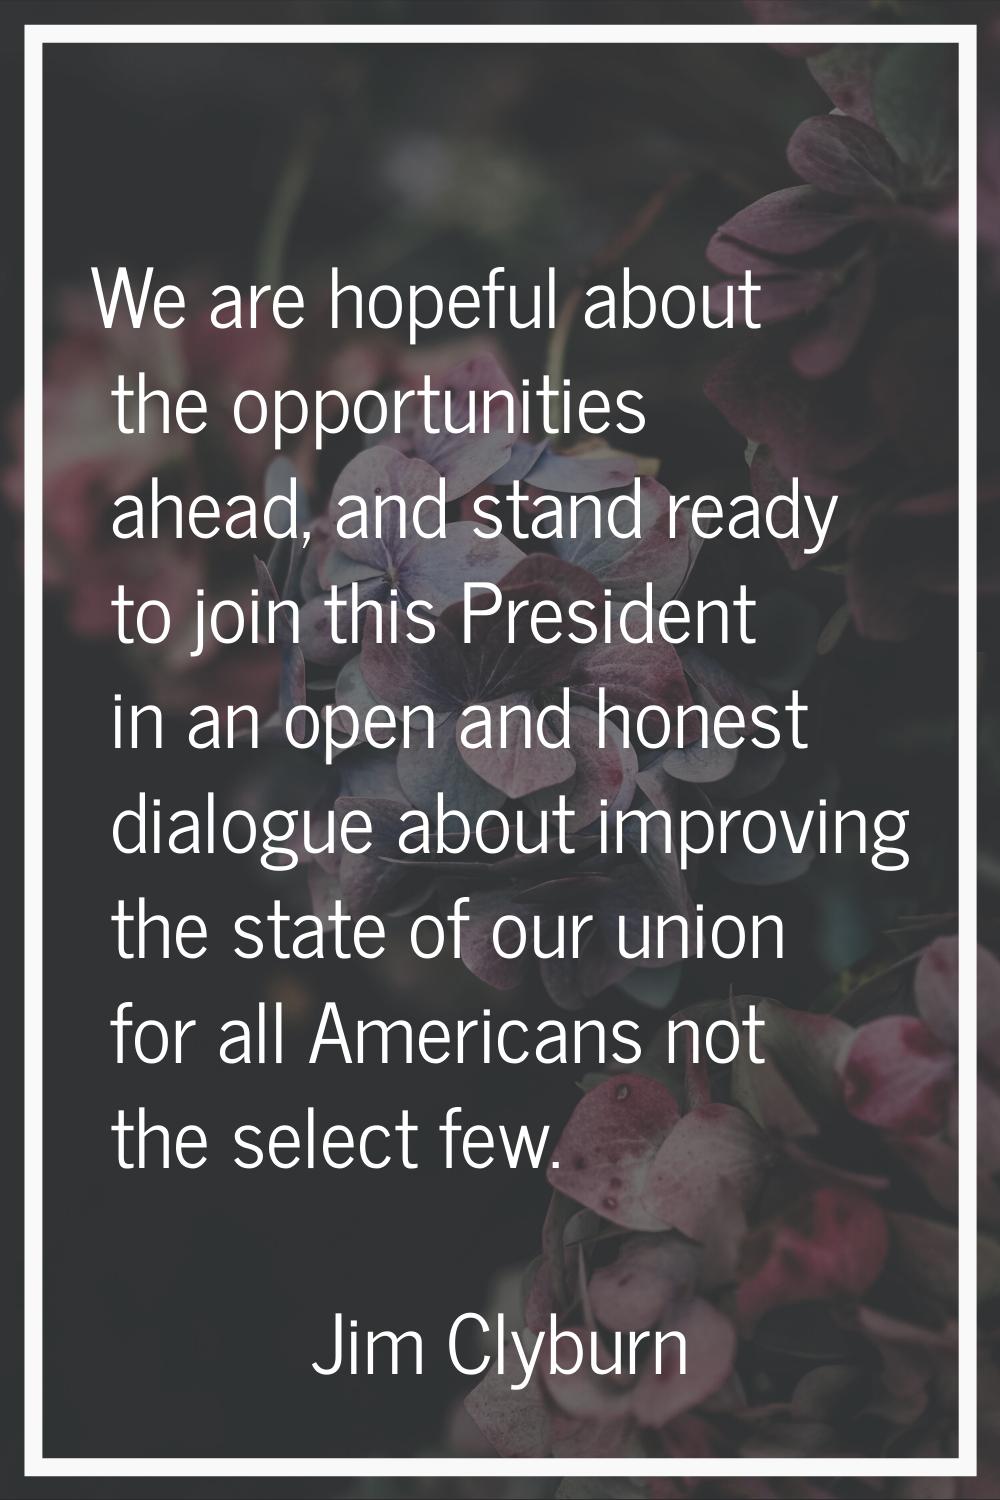 We are hopeful about the opportunities ahead, and stand ready to join this President in an open and